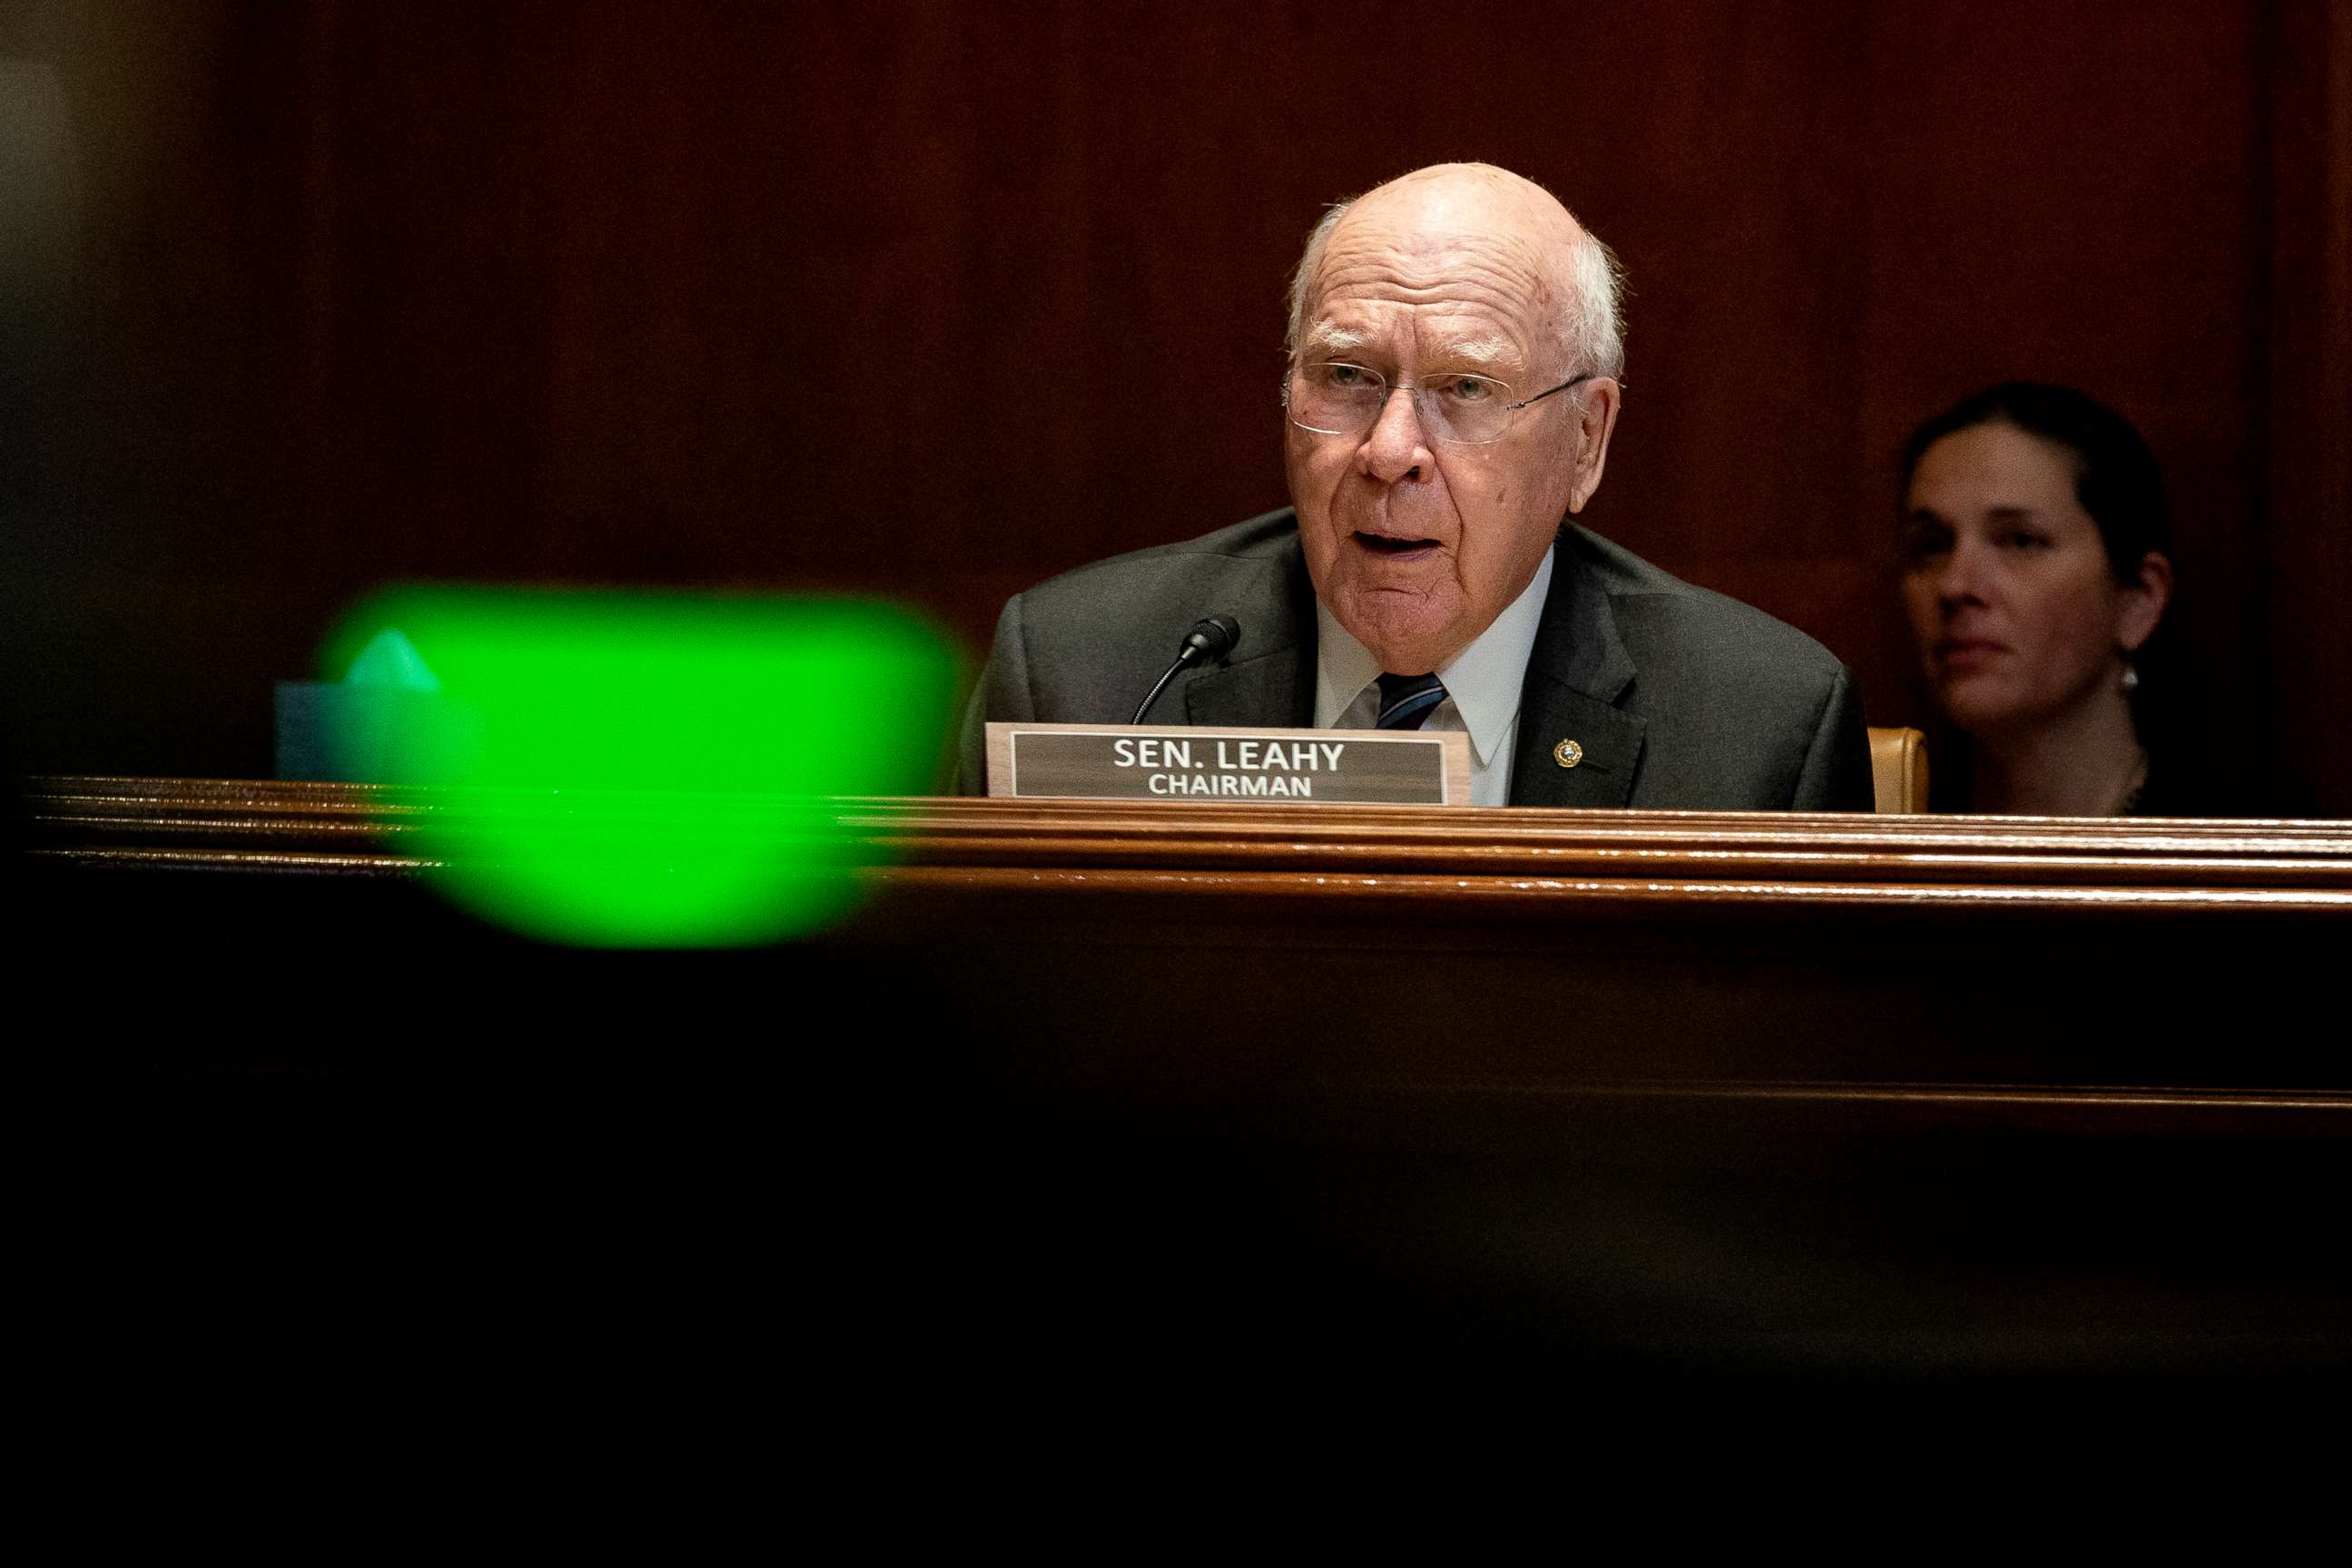 PHOTO: Senator Patrick Leahy speaks during a Senate Appropriations Subcommittee on Commerce, Justice, Science, and Related Agencies hearing, June 23, 2021, on Capitol Hill in Washington, D.C.